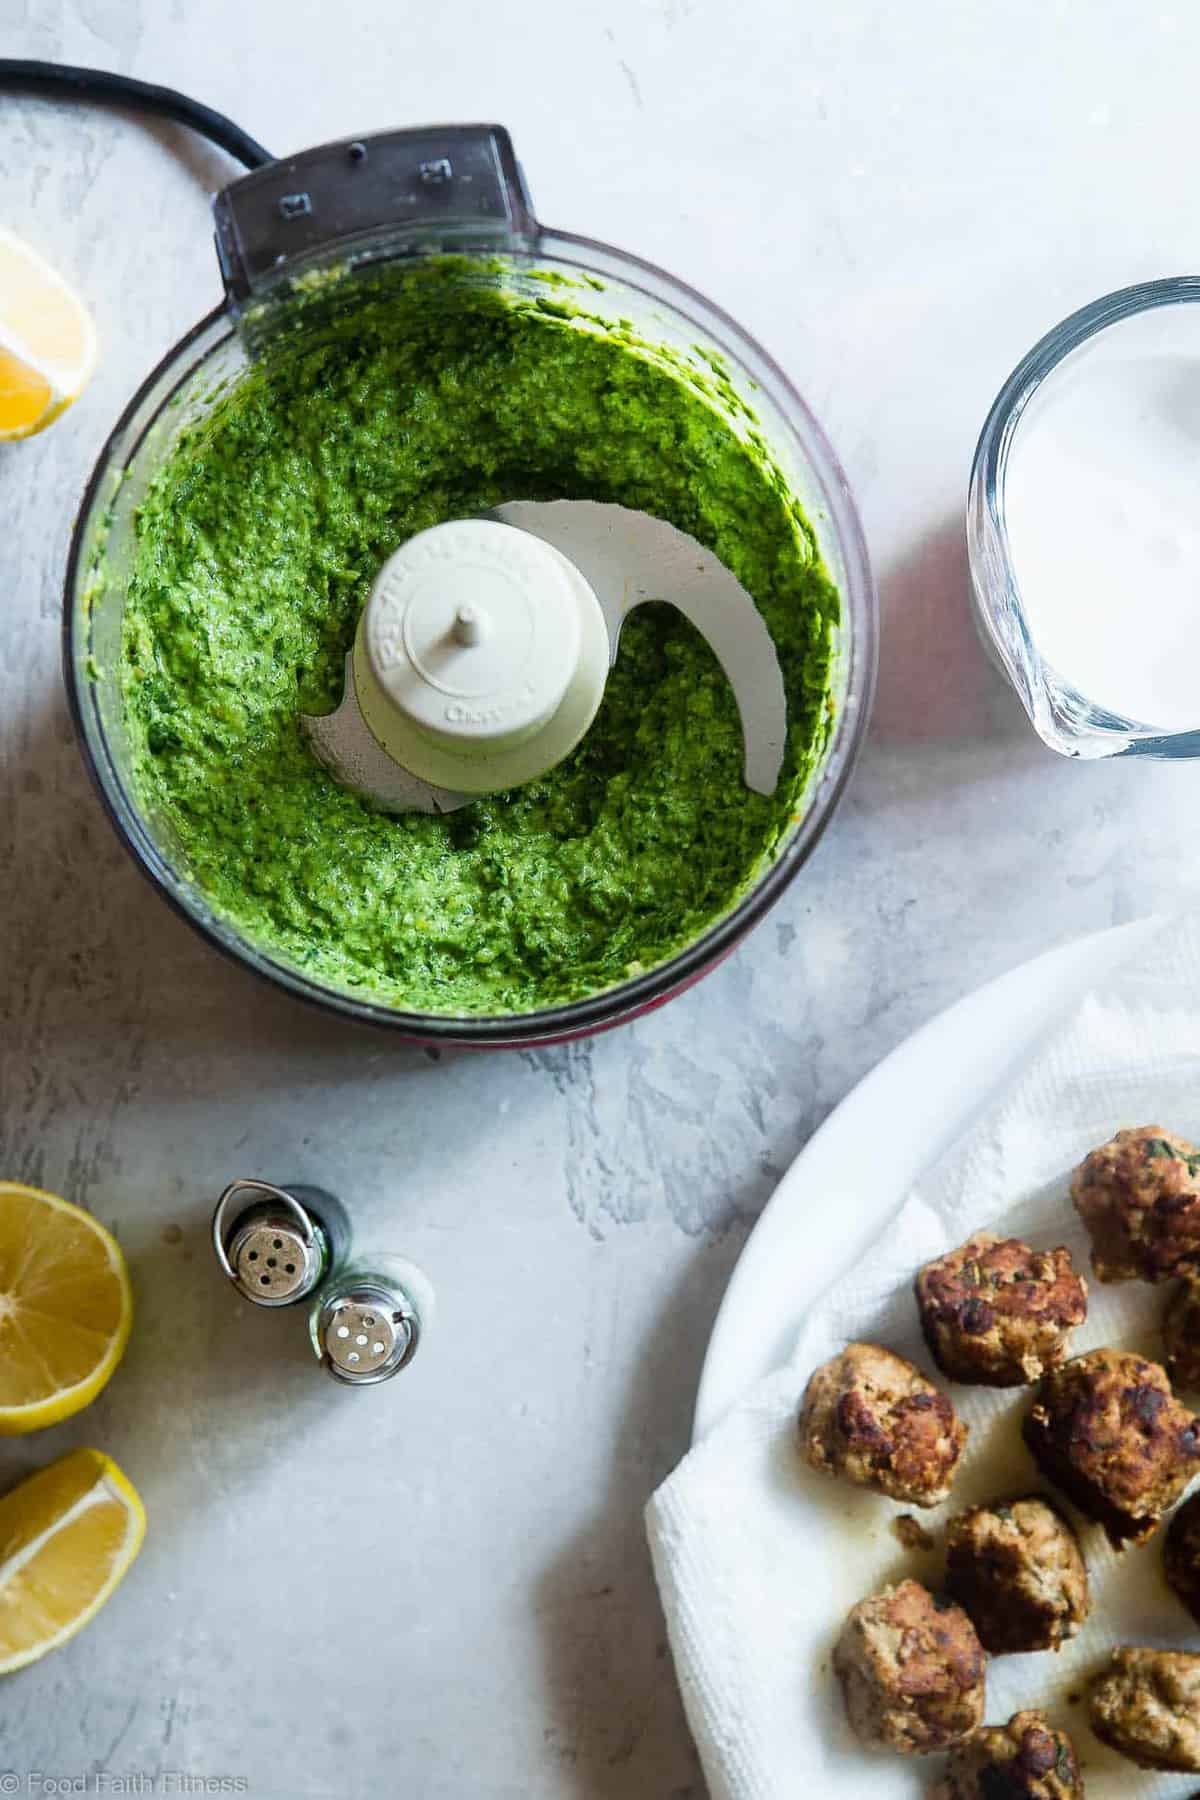 Gluten Free Whole30 Paleo Turkey Meatballs - These healthy whole30 turkey meatballs are simmered in a coconut milk basil pesto cream sauce for an easy, weeknight meal that is keto and paleo friendly and so tasty! | #Foodfaithfitness | 